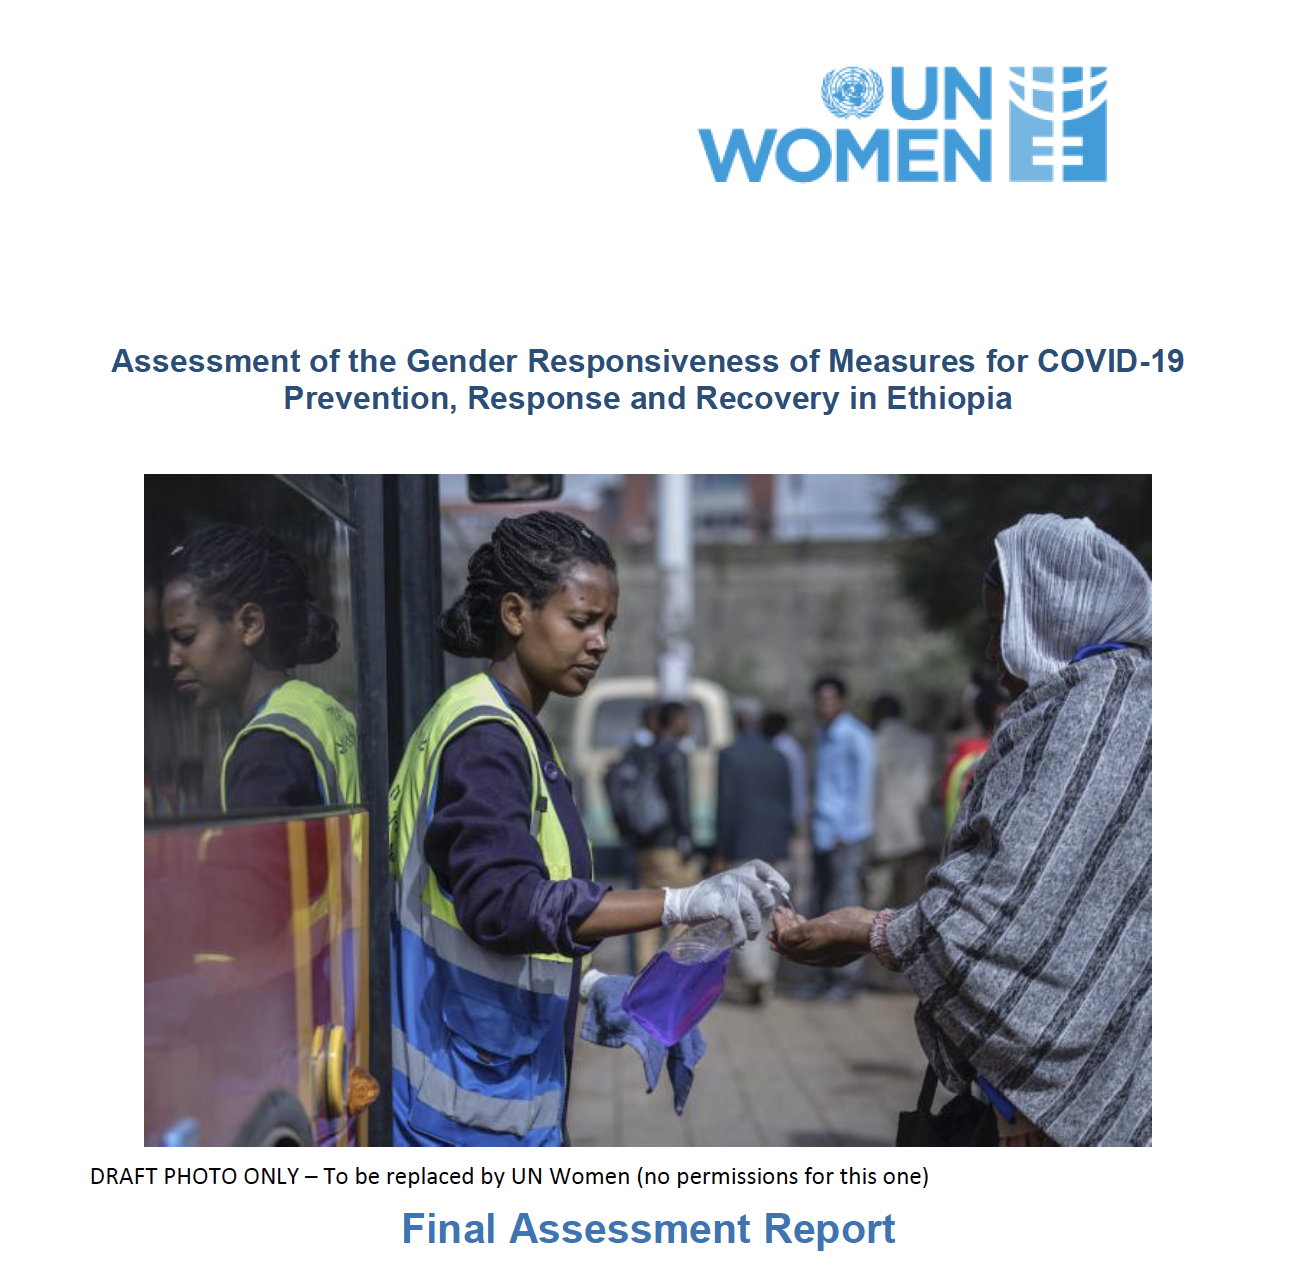 Assessment of the Gender Responsiveness of Measures for COVID-19 Prevention, Response and Recovery in Ethiopia 